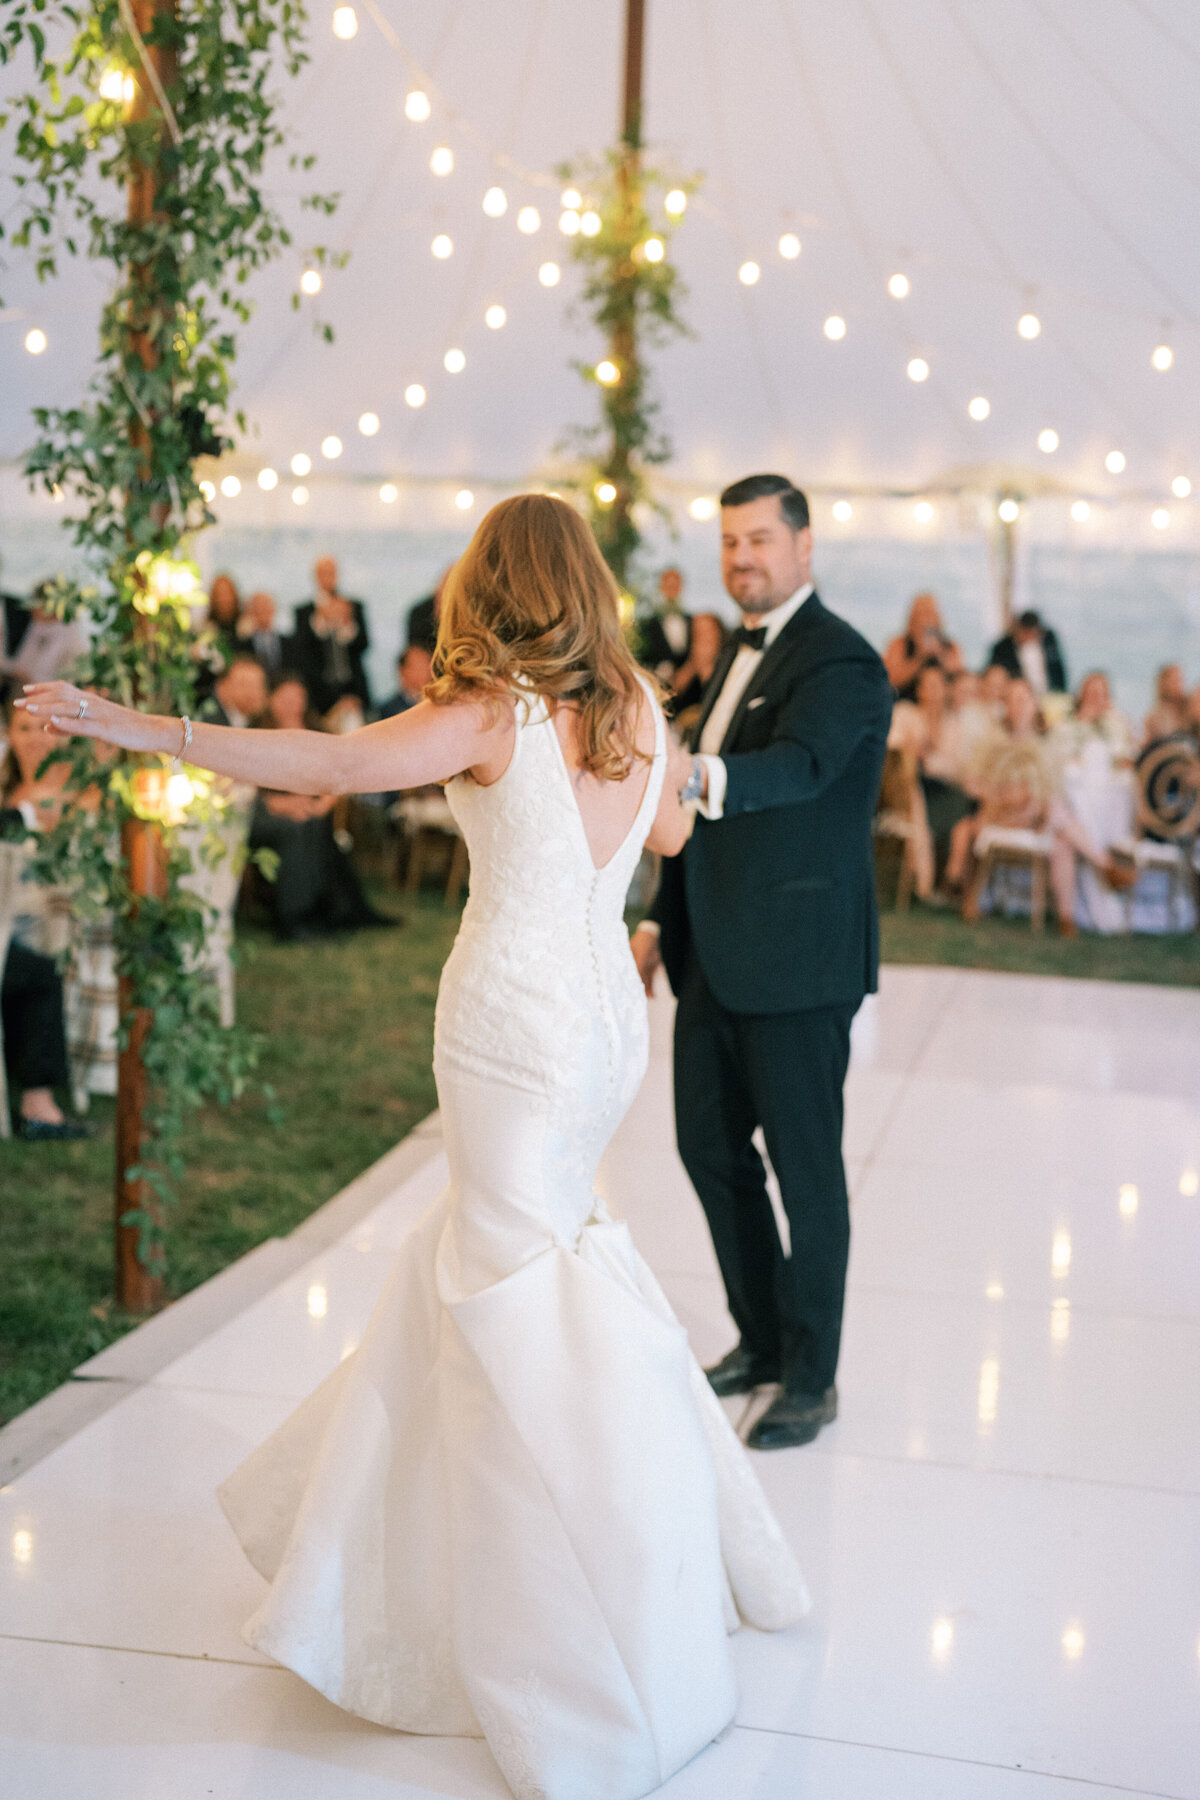 Bride and groom first dance at Aspen wedding